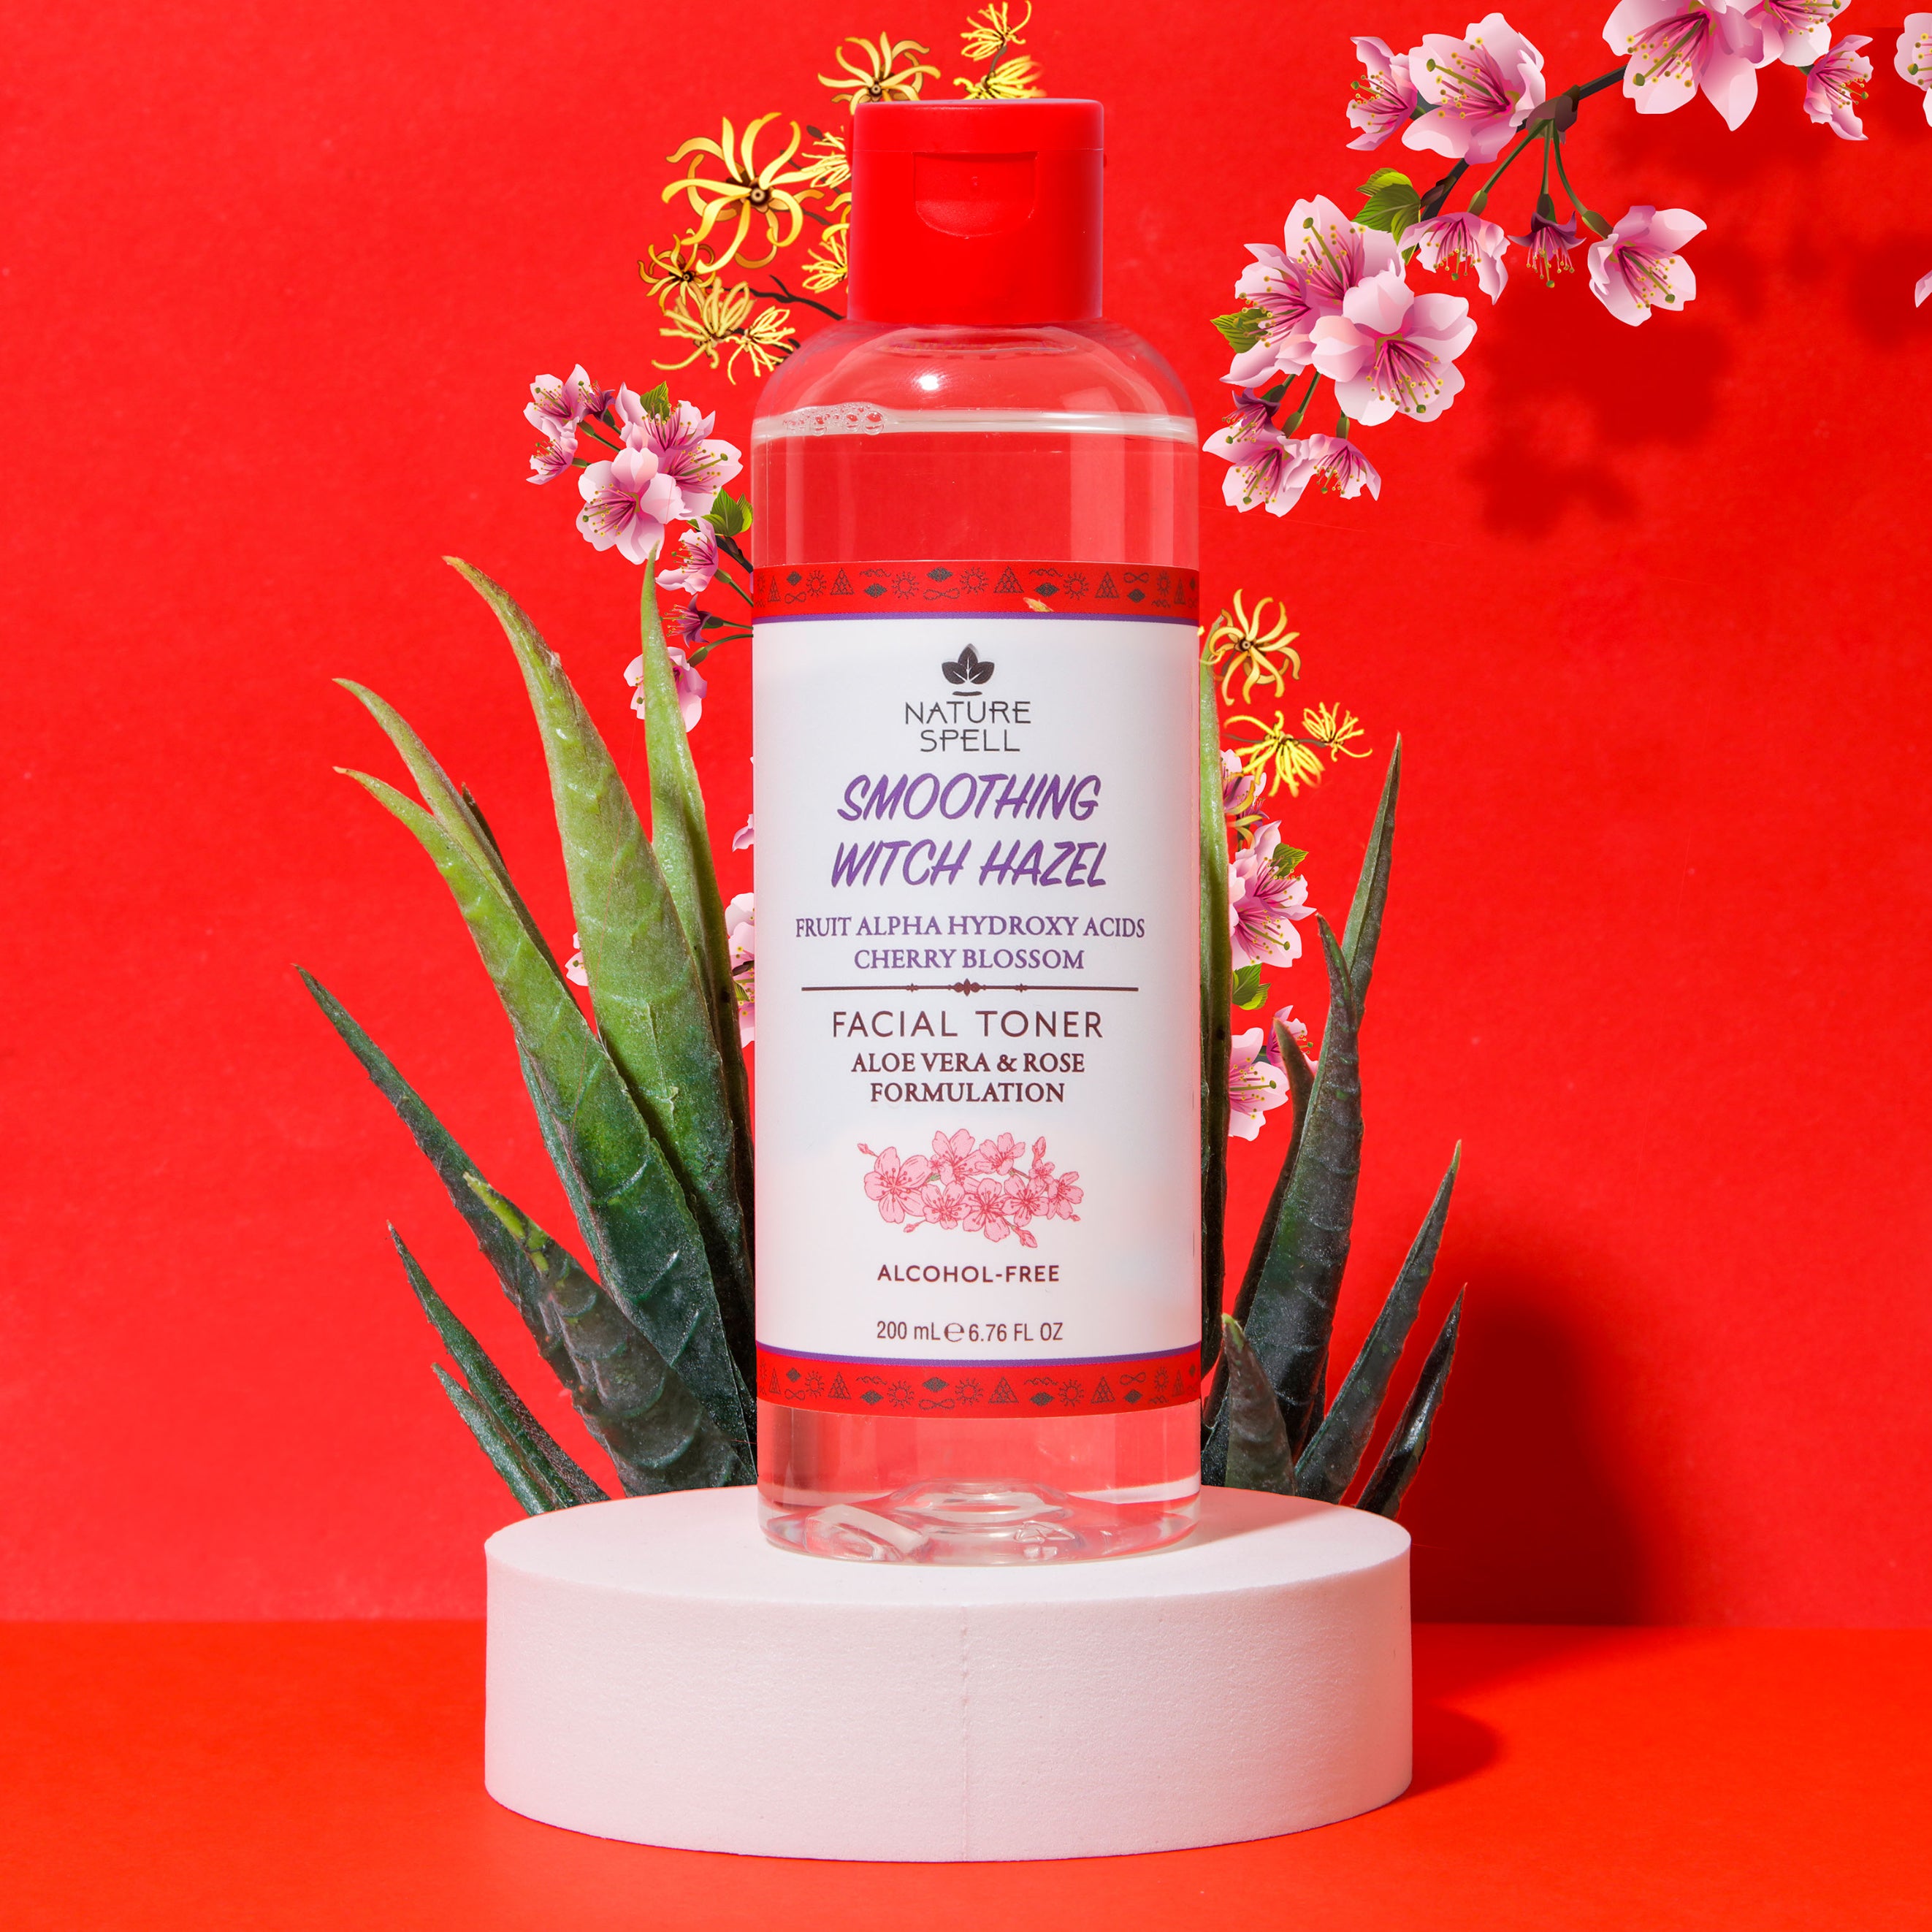 Smoothing Witch Hazel Face Toner with AHA's